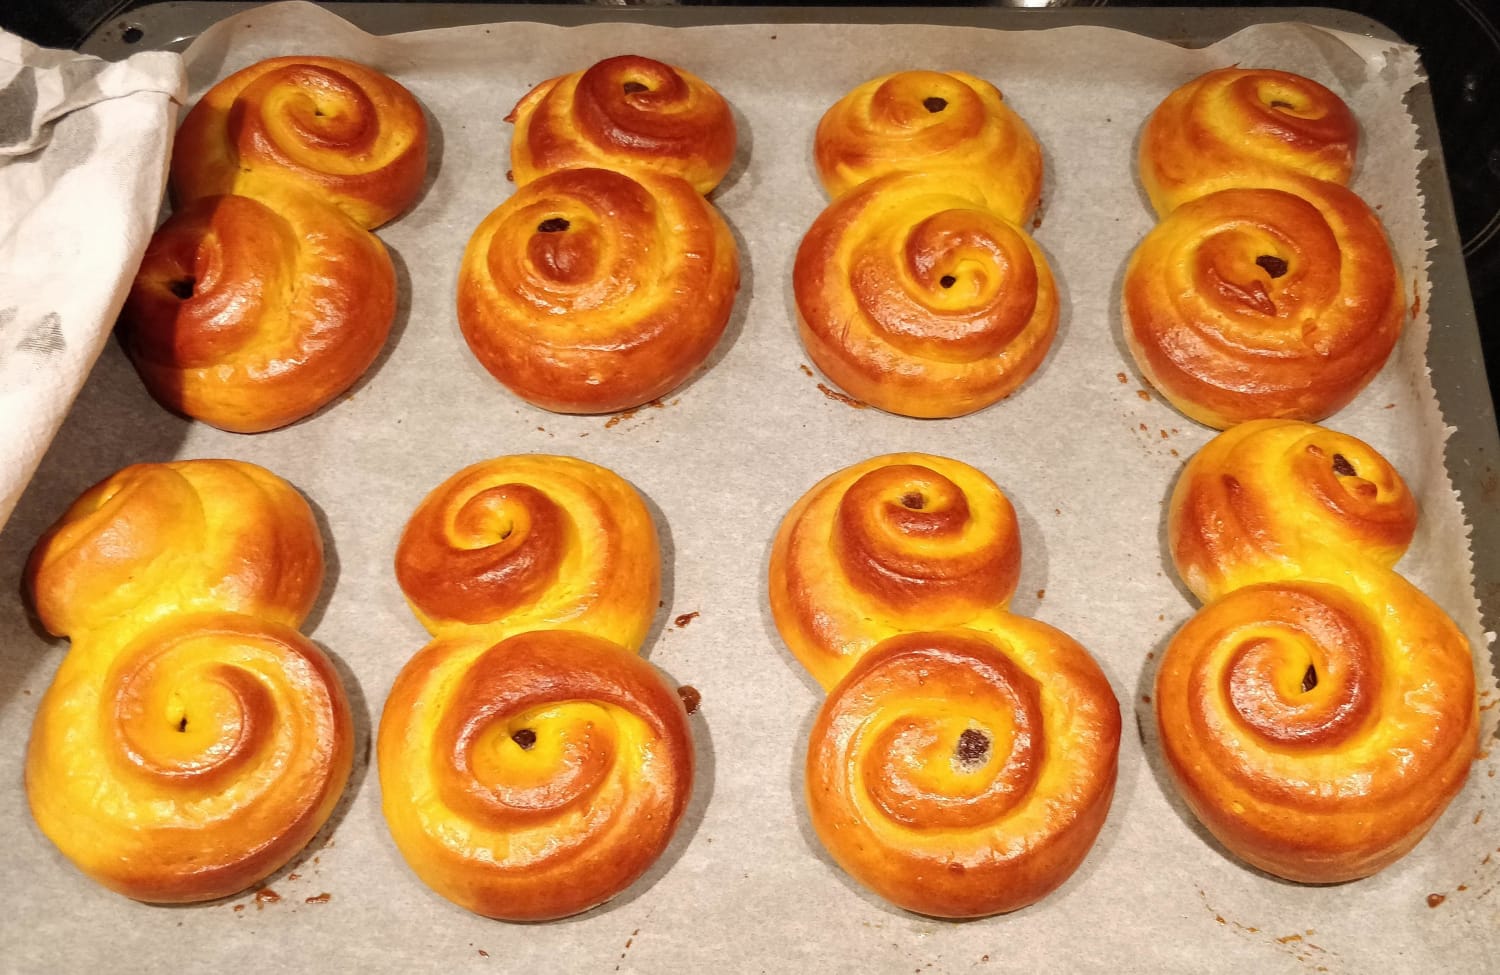 This years batch of Lussekatter! Swedish saffron buns traditionally made for Christmas